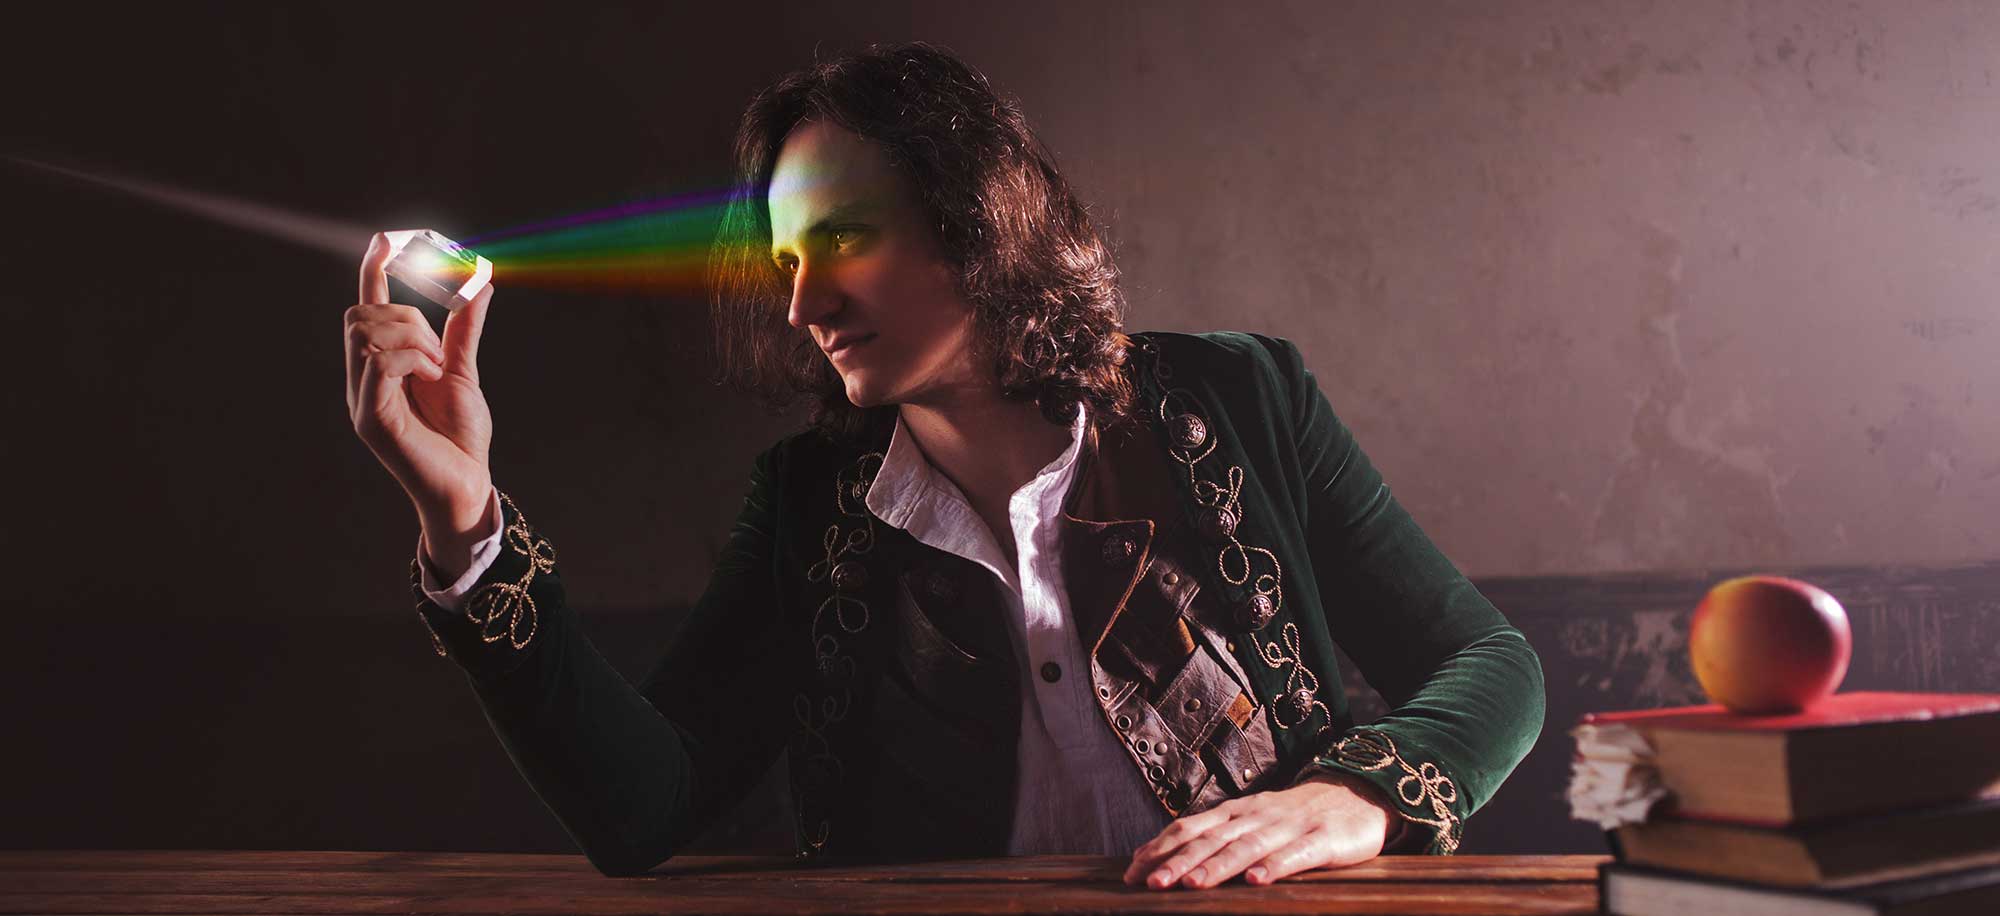 Scientist observing coloured light with a prism.